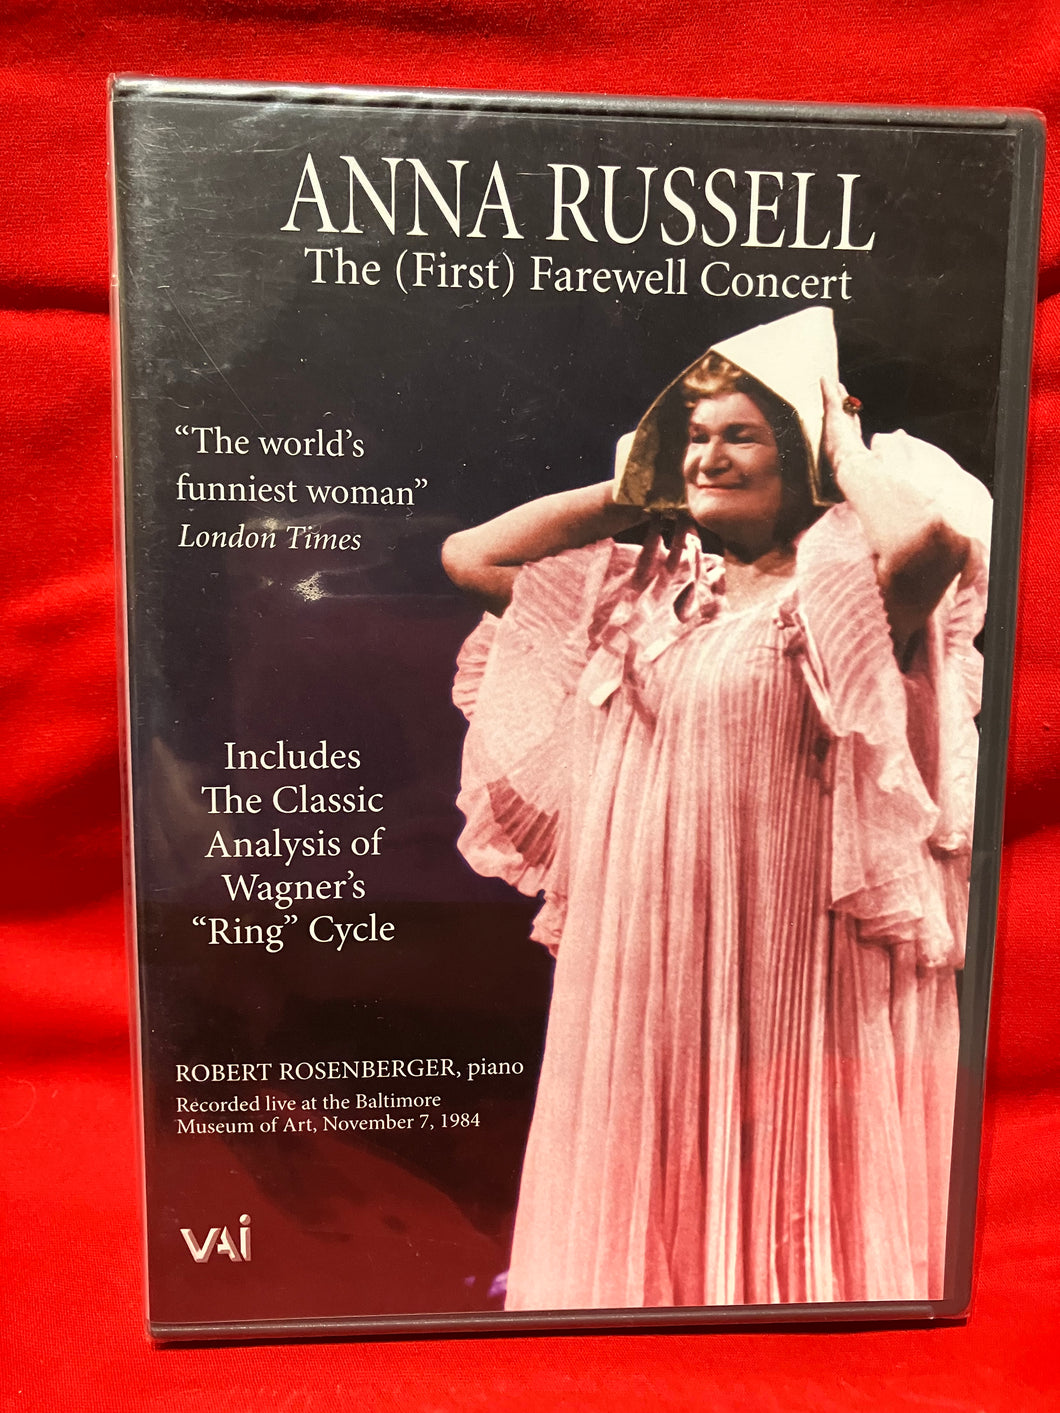 ANNA RUSSELL - THE (FIRST) FAREWELL CONCERT - DVD (SEALED)